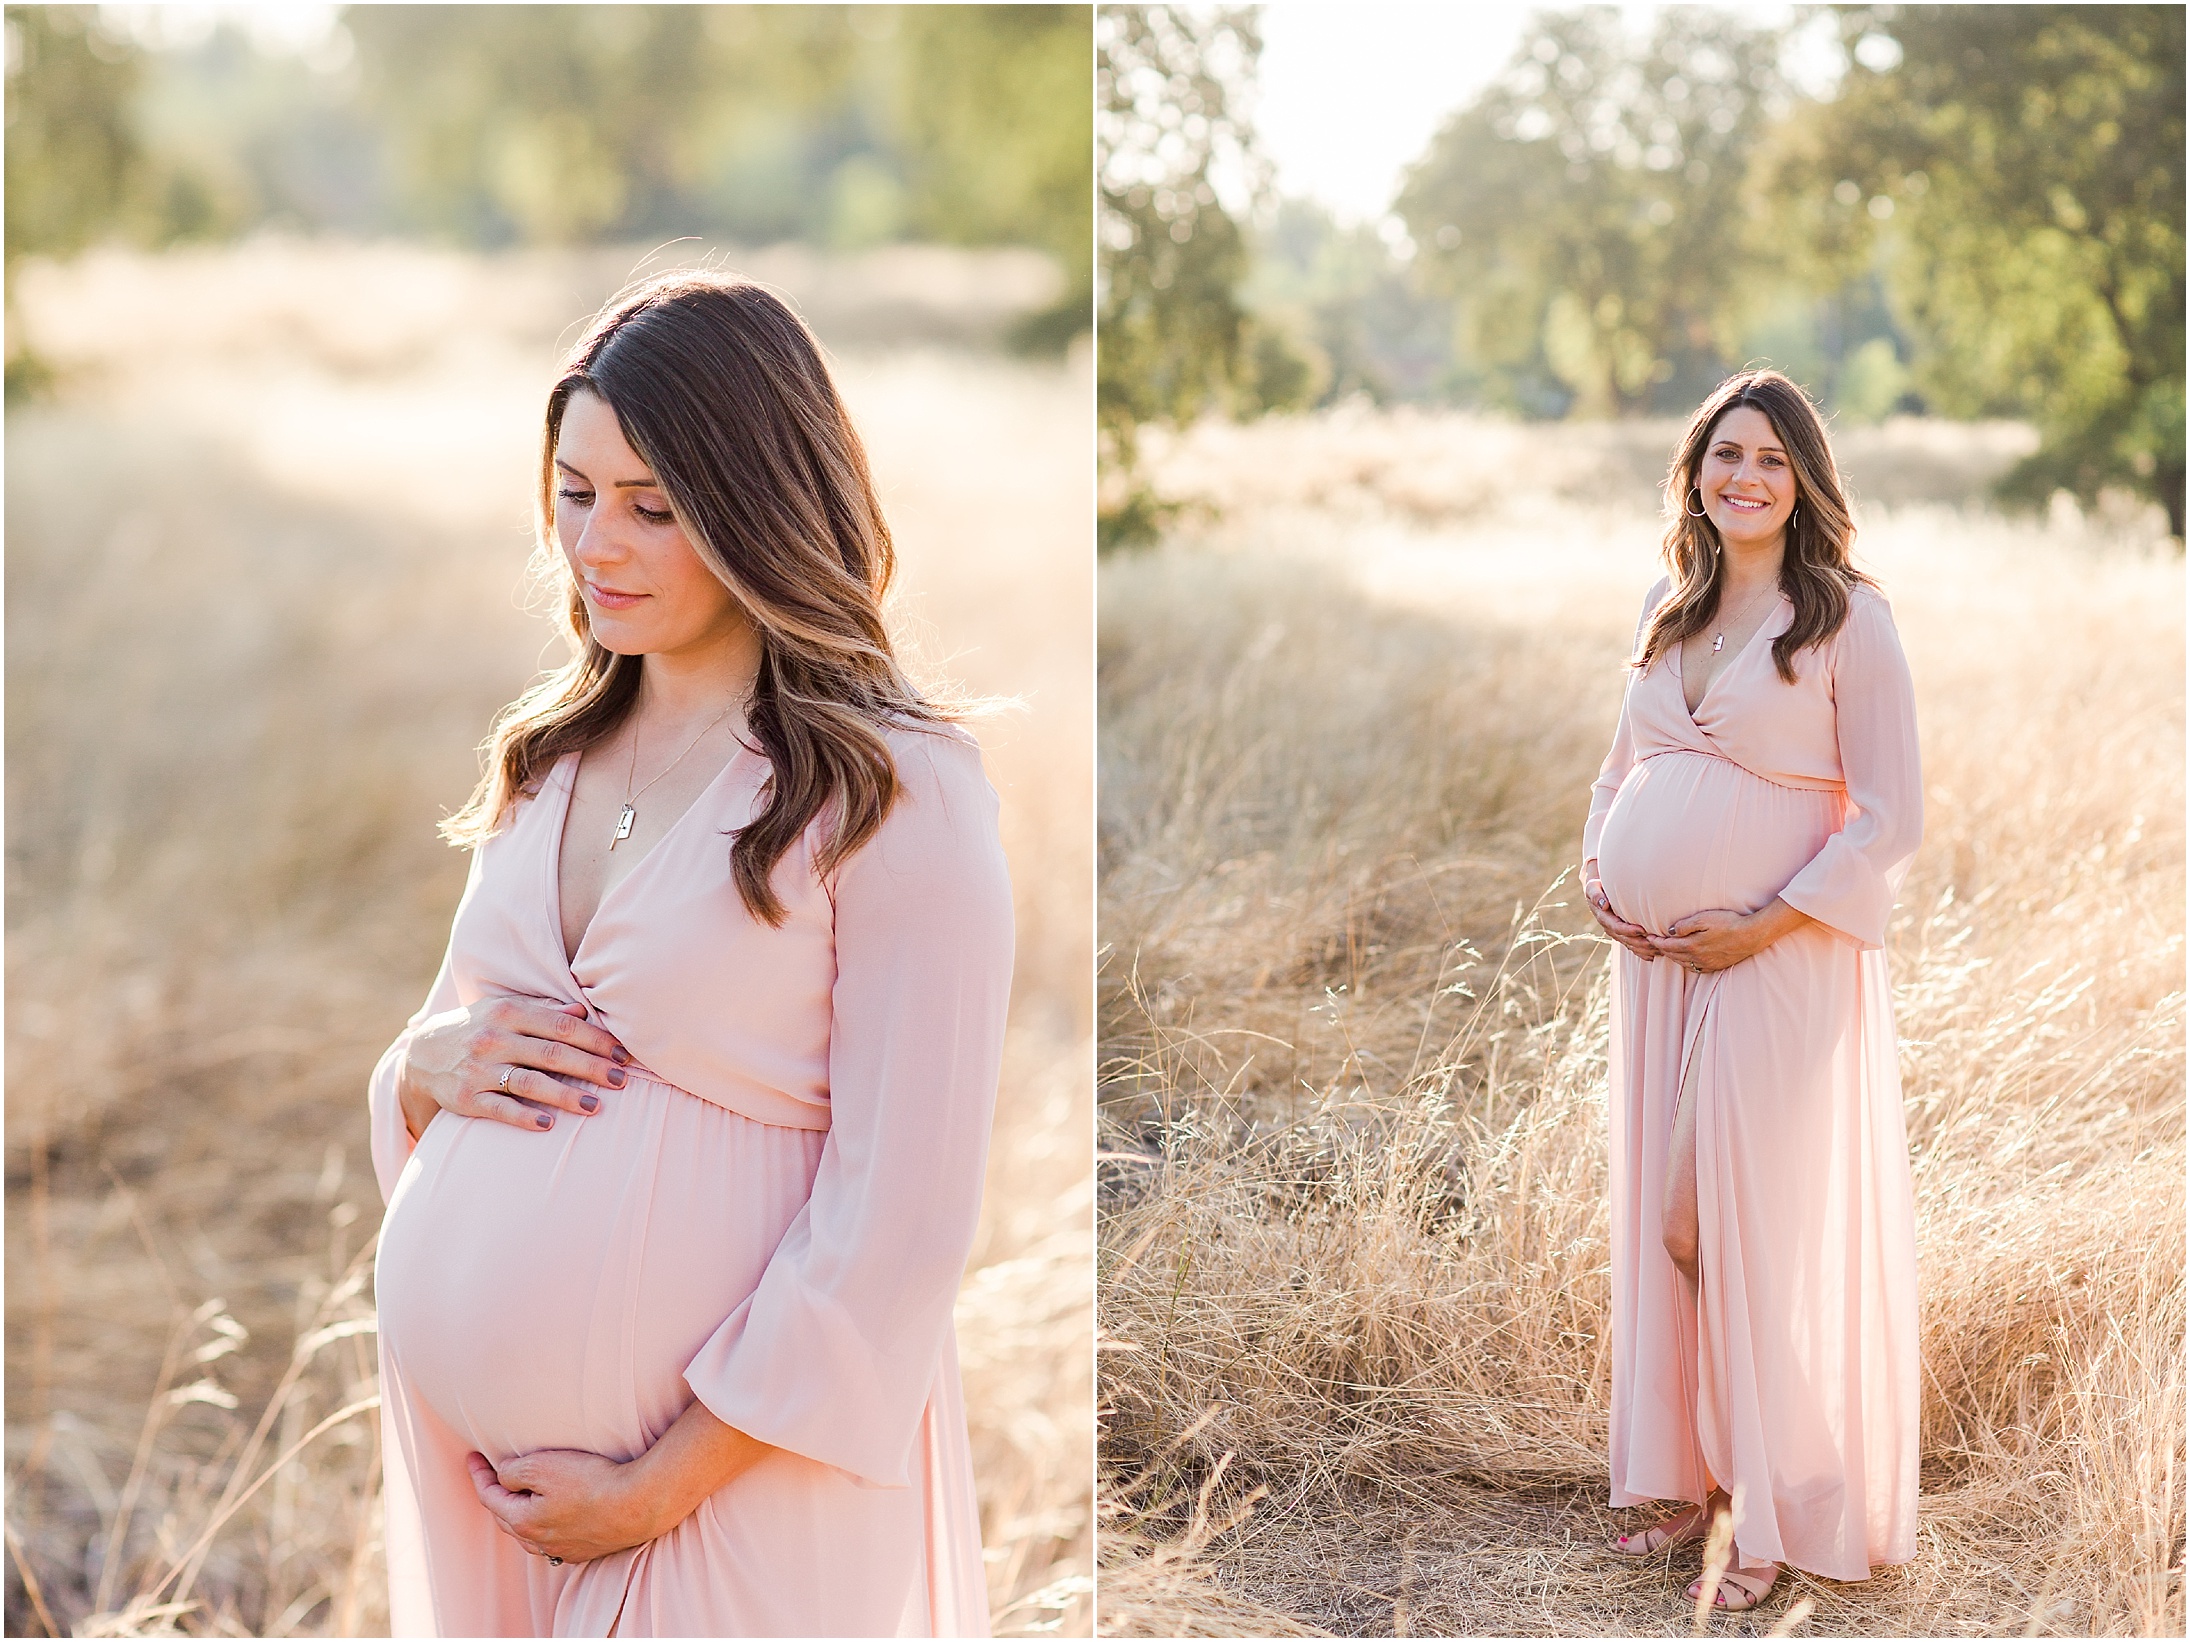 Fall Family Maternity Portraits Chico California Pastels in Grassy Field,